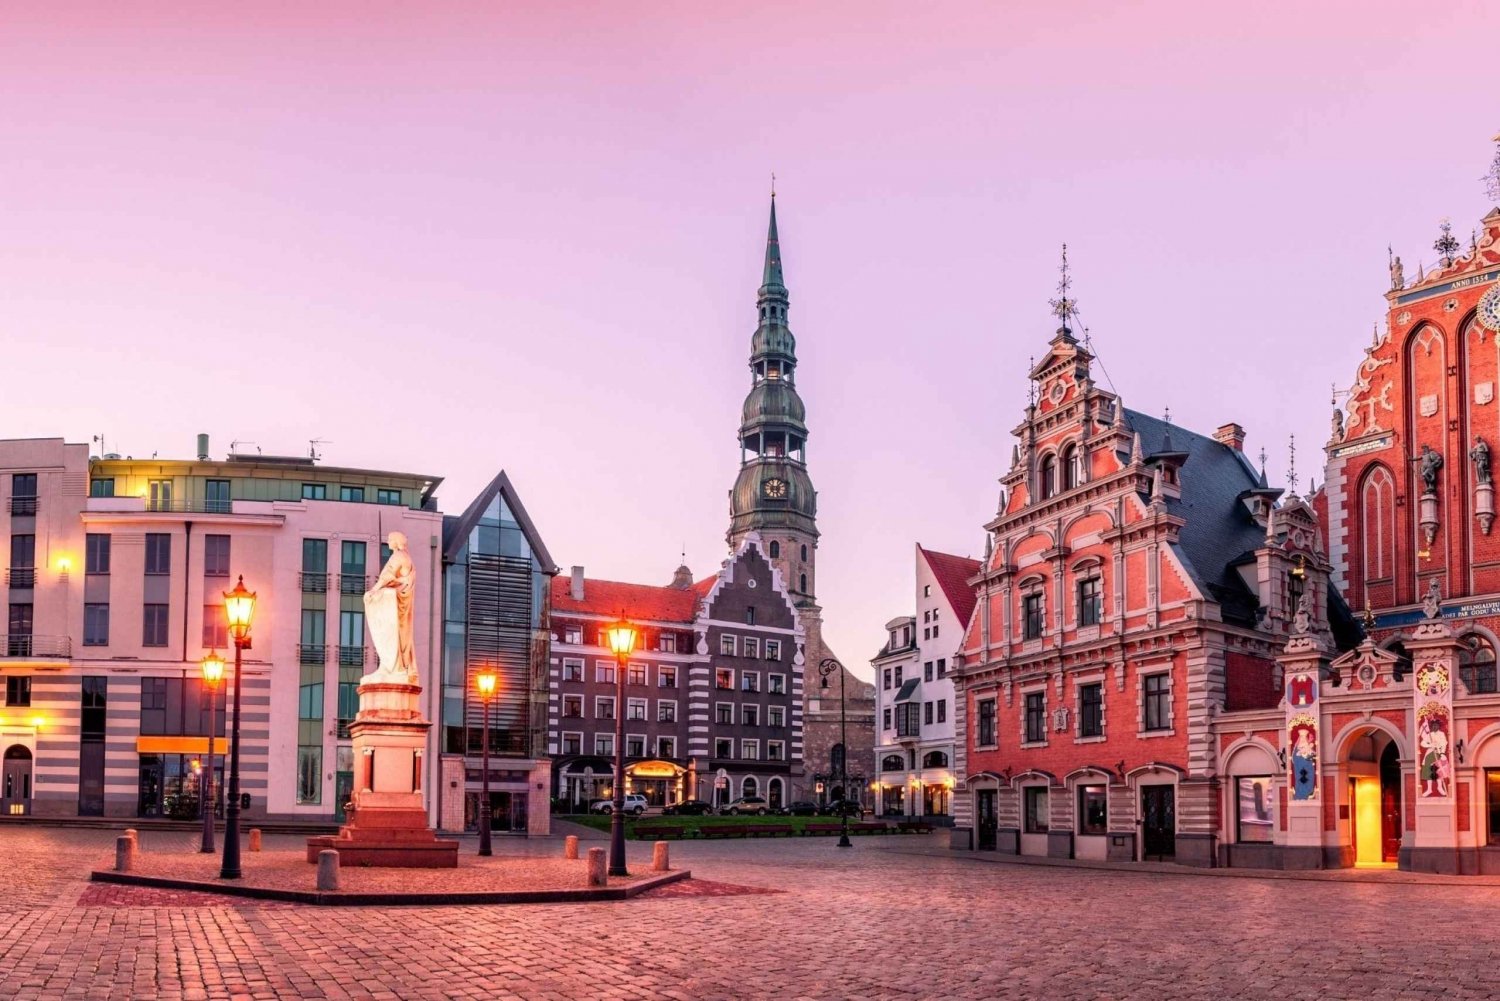 Riga: First Meeting With The City Self-Guided Phone Tour